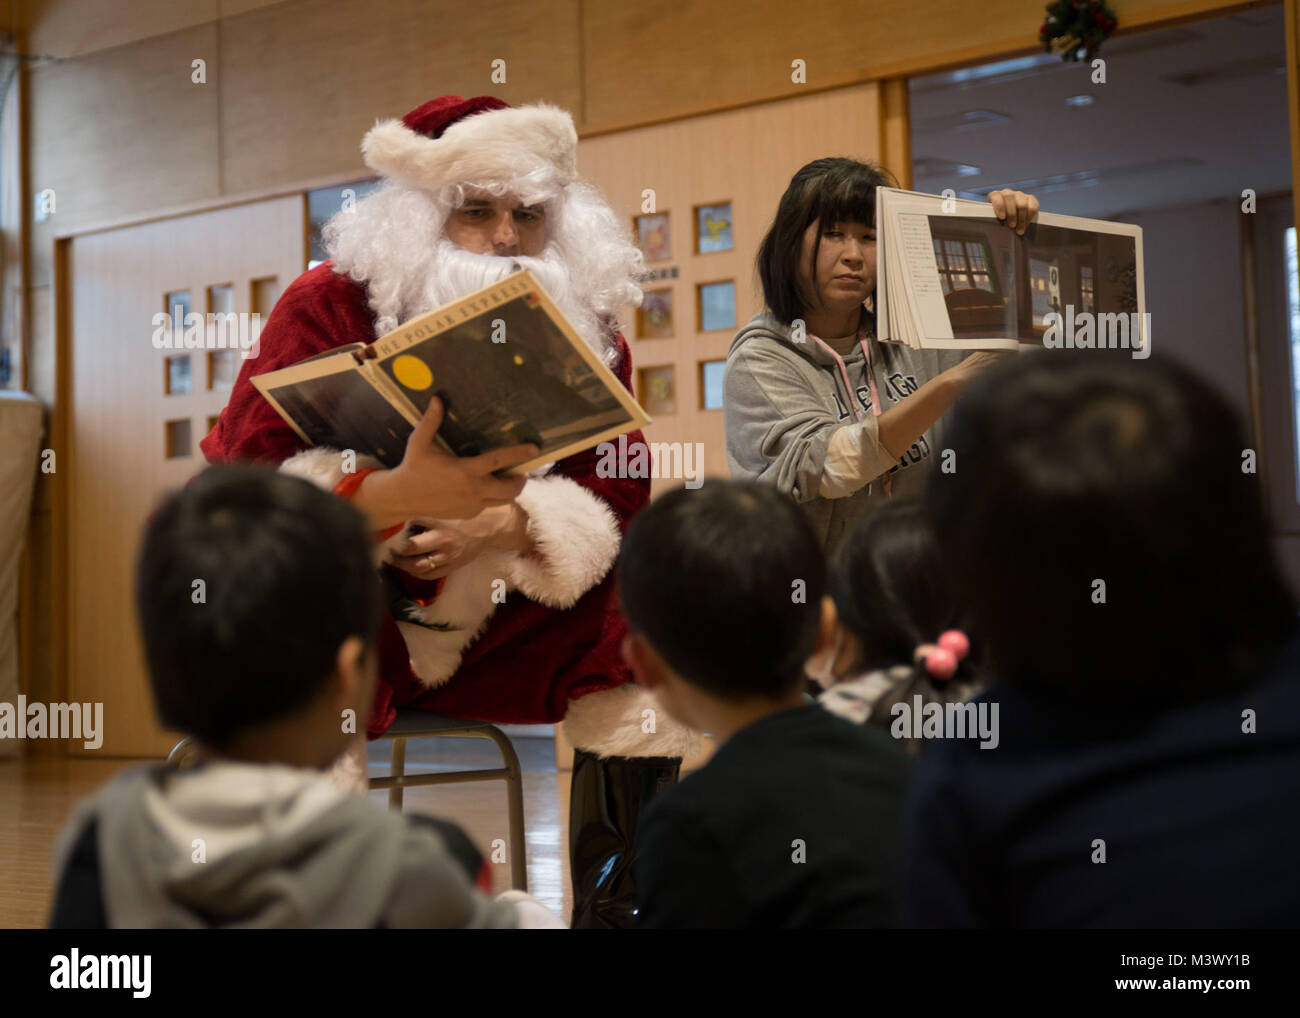 171218-N-DA275-058 MISAWA, Japan (Dec. 18, 2017) Legalman 1st Class Donald McDowell, assigned to Naval Air Facility Misawa (NAFM), visits children at the Ohzora Jido-Kan, a Japanese after school care center, dressed as Santa Claus for a special holiday themed visit. Sailors from NAFM volunteer to make bi-weekly visits to the after school care center as part of community relations efforts. (U.S. Navy photo by Mass Communication Specialist 3rd Class Samuel Bacon/Released) 171218-N-DA275-058 25380736178 o Stock Photo